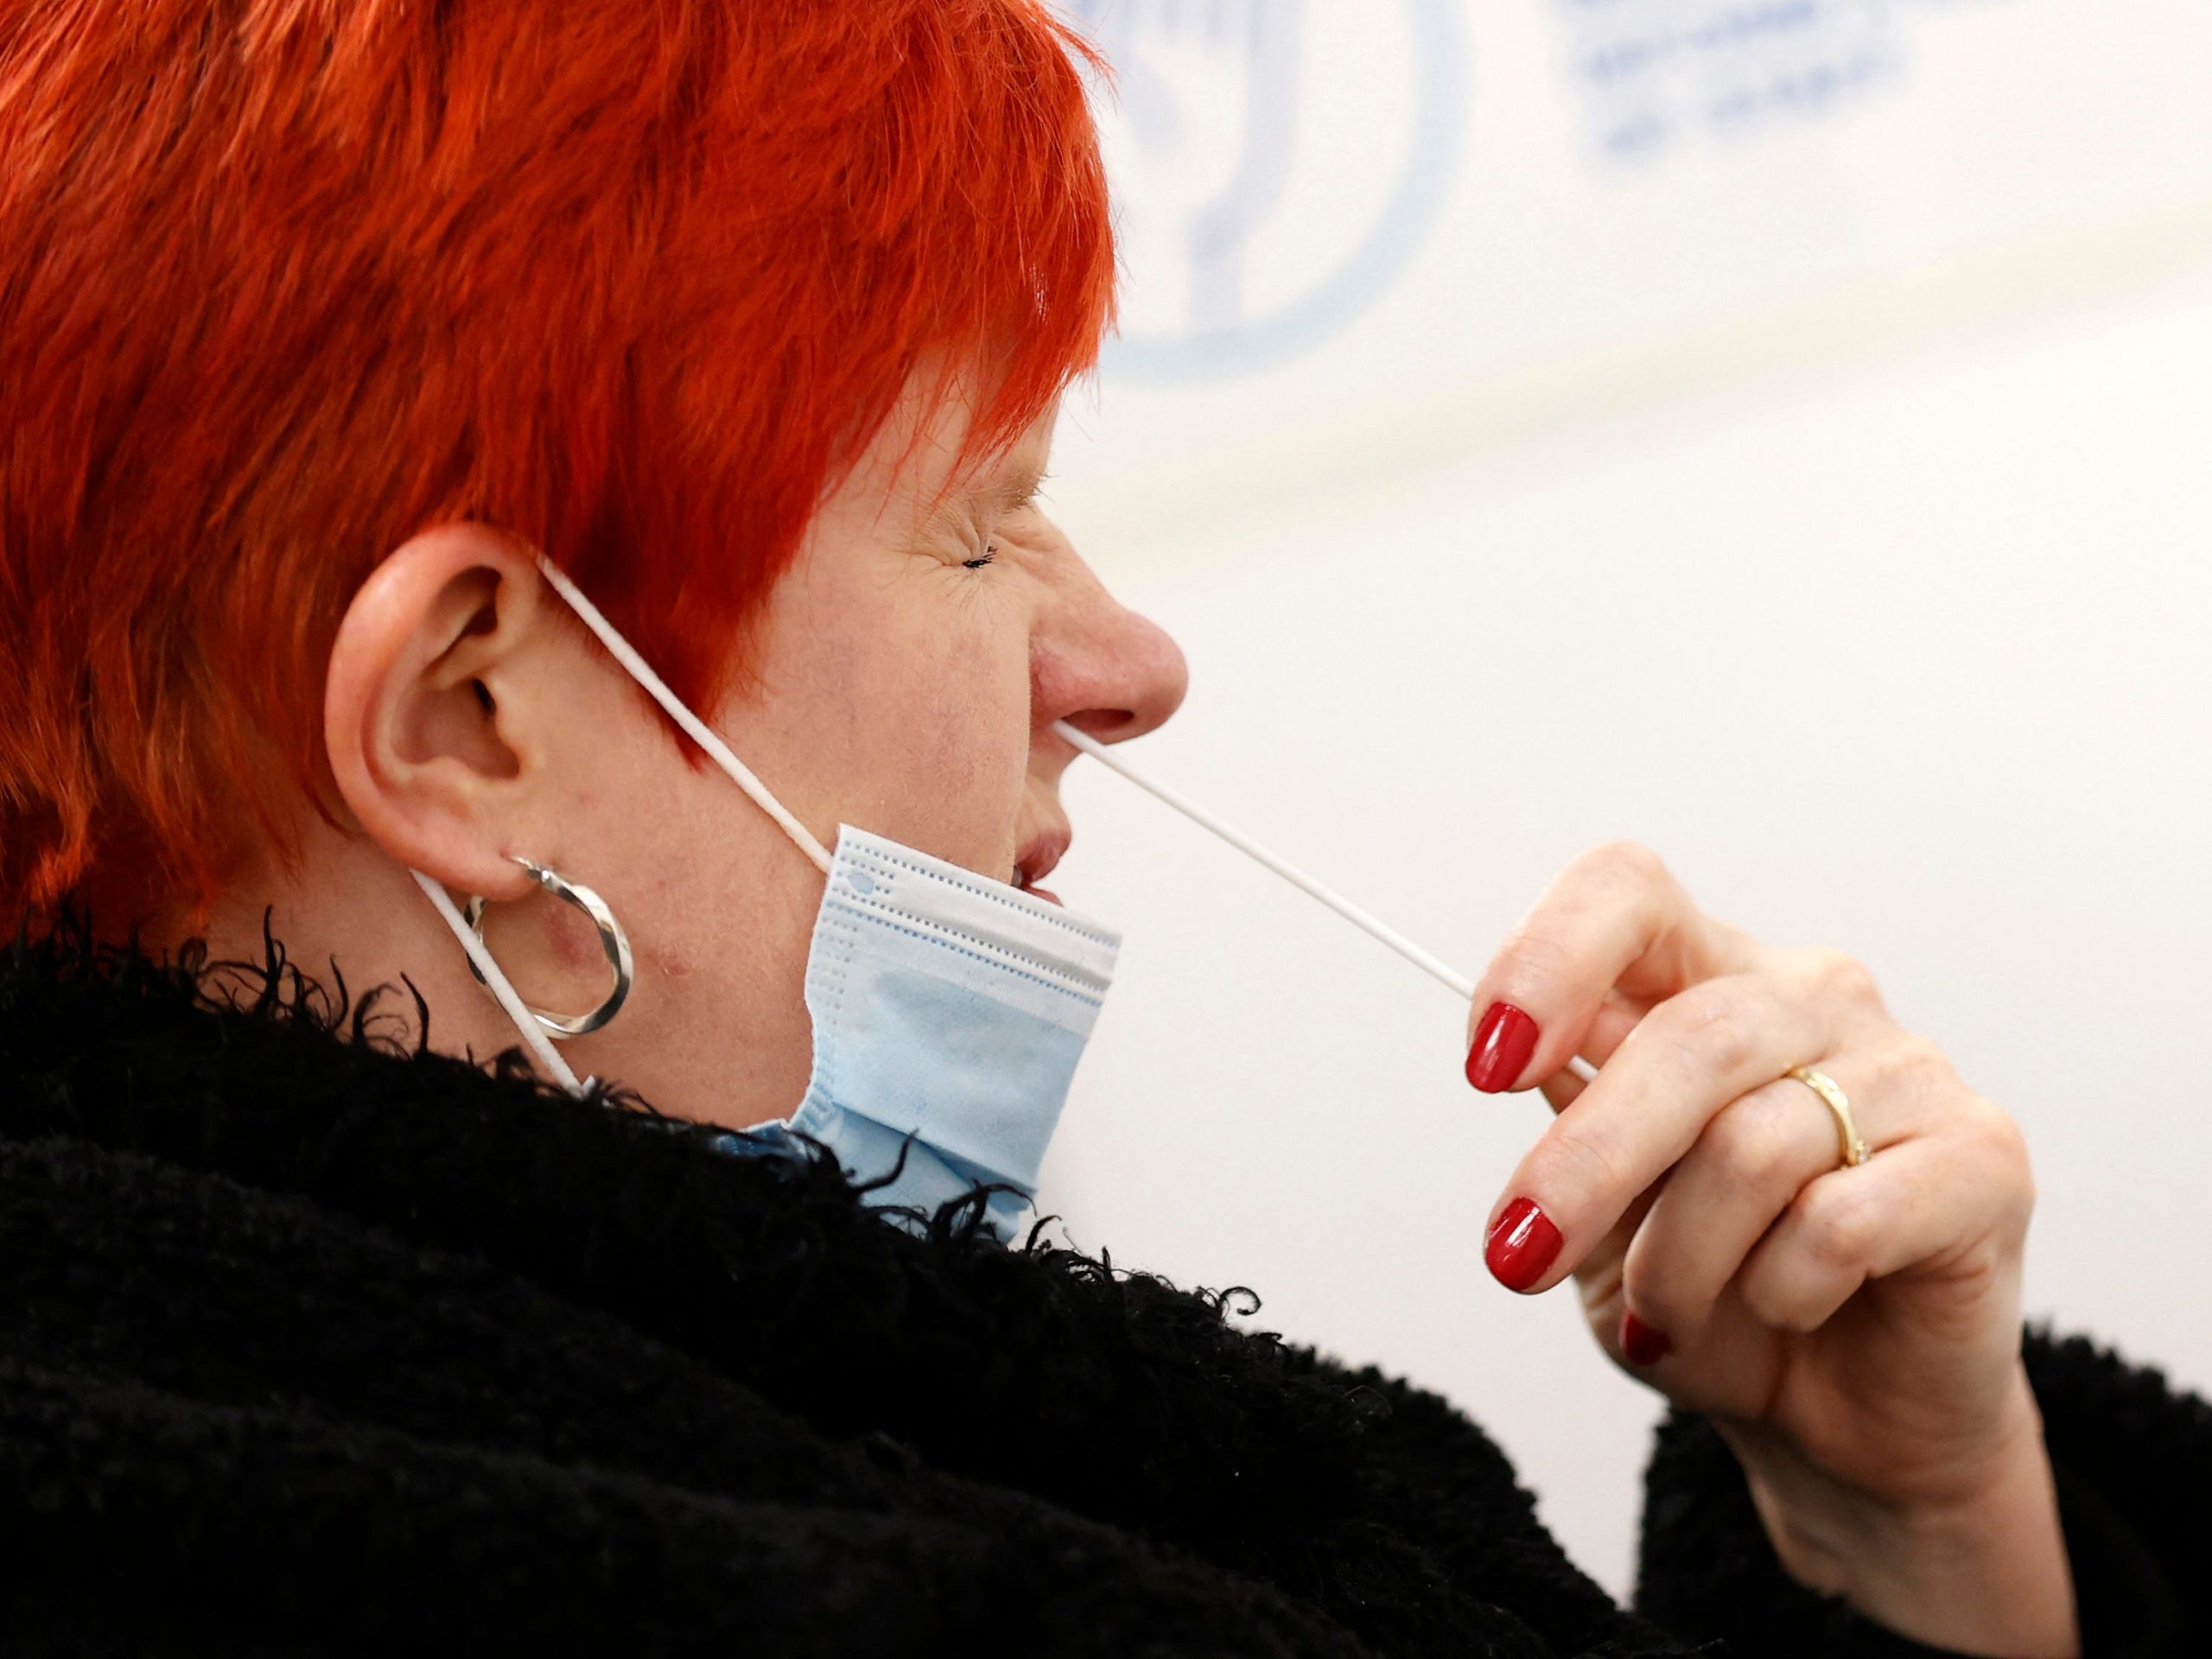 Women with red hair and red nail varnish in a black coat and gold hoops puts COVID-19 test swab into right nostril.